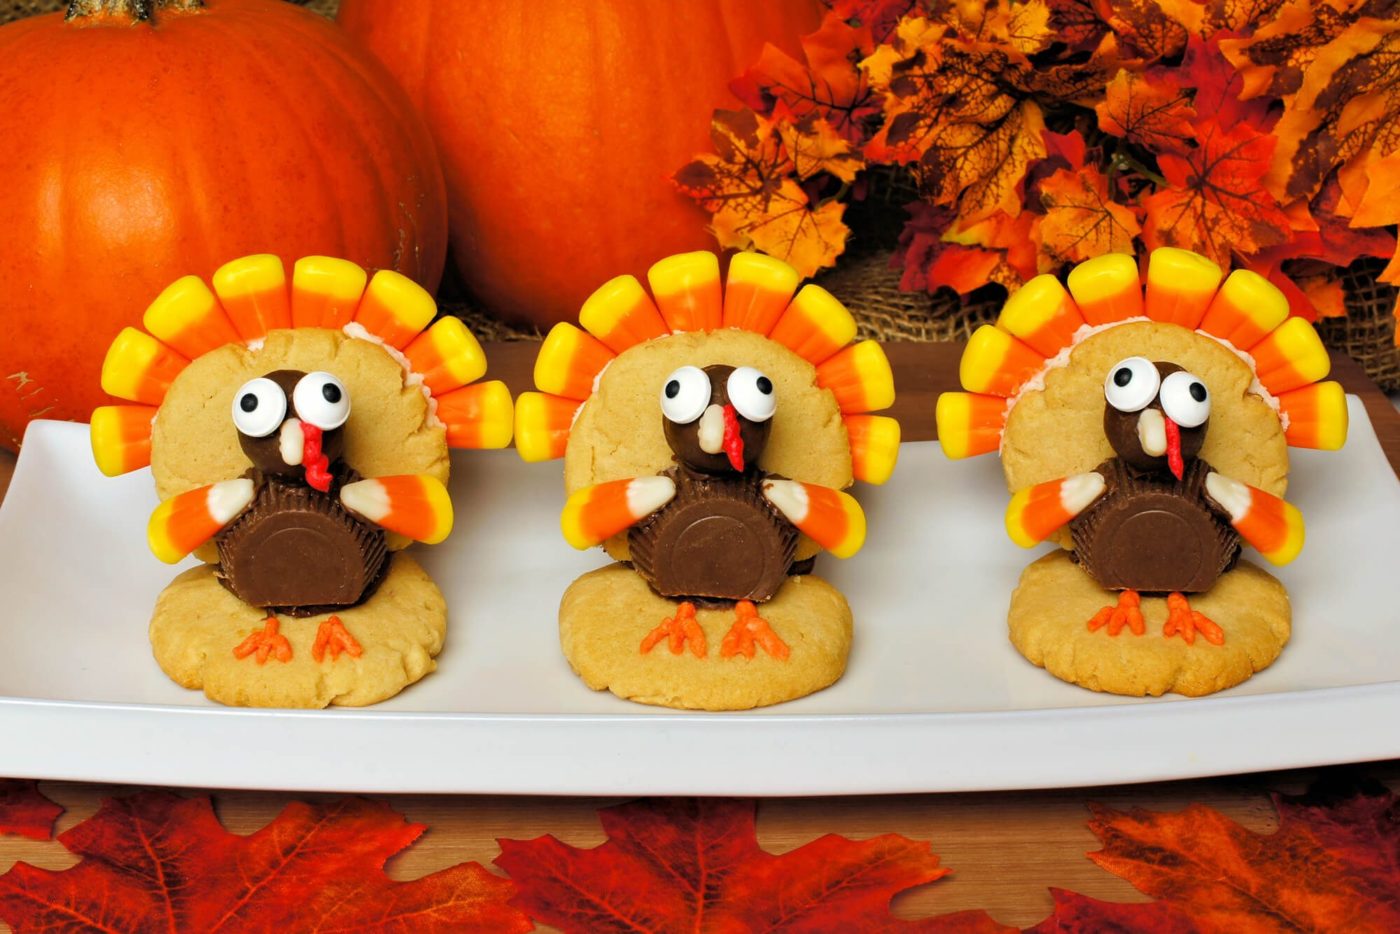 Cookies with thanksgiving turkeys made out of candy on them.